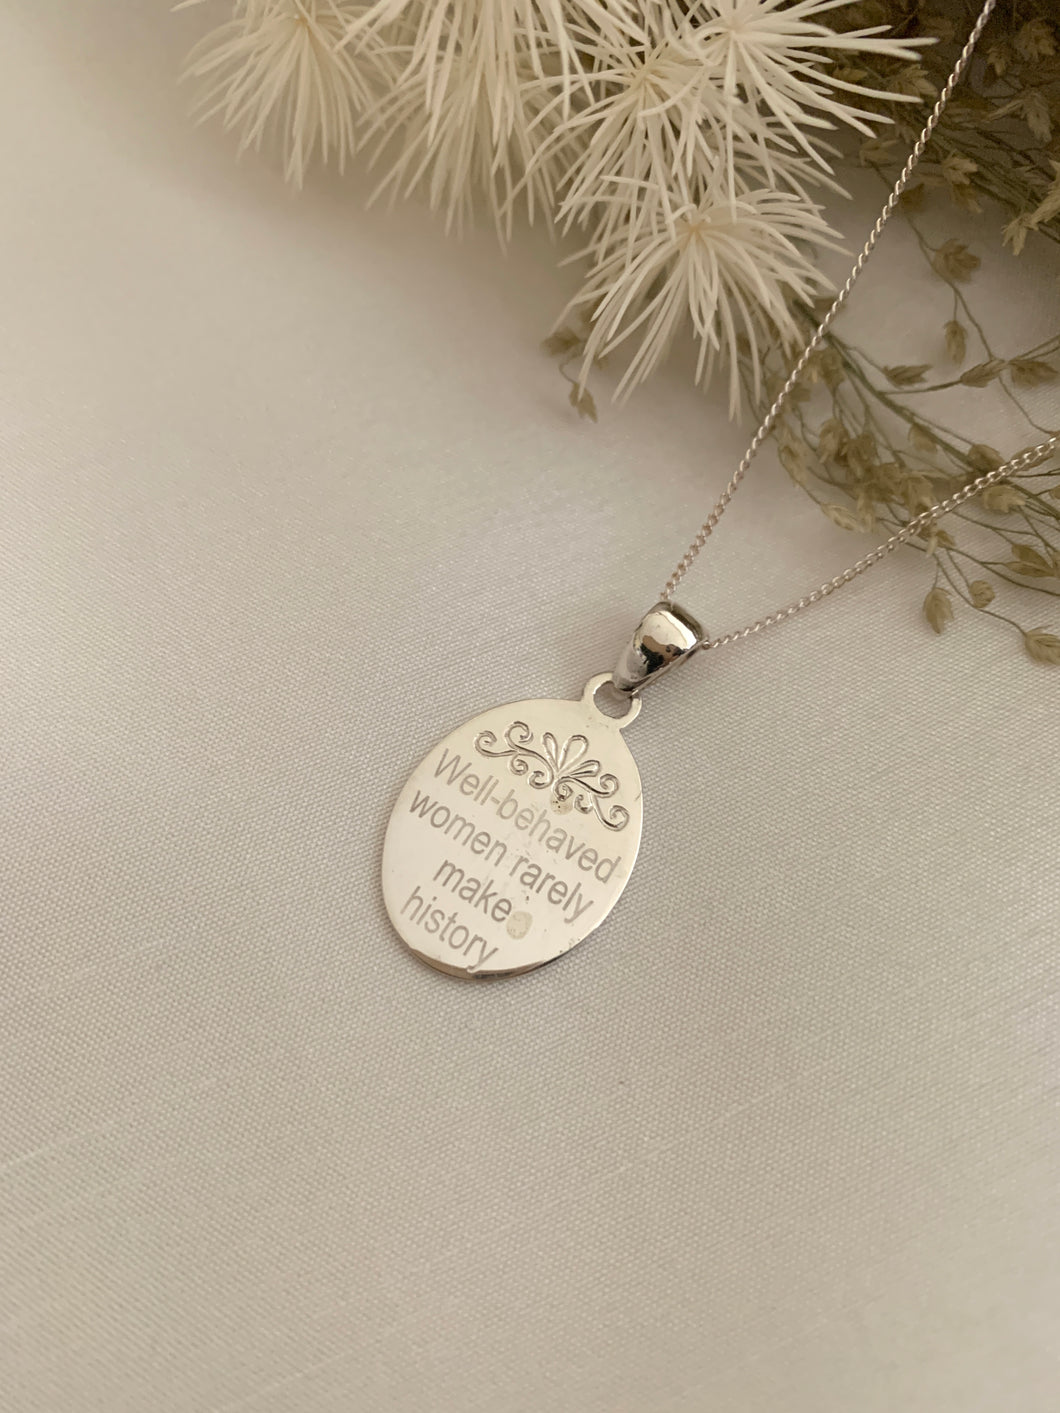 An oval necklace with a saying 